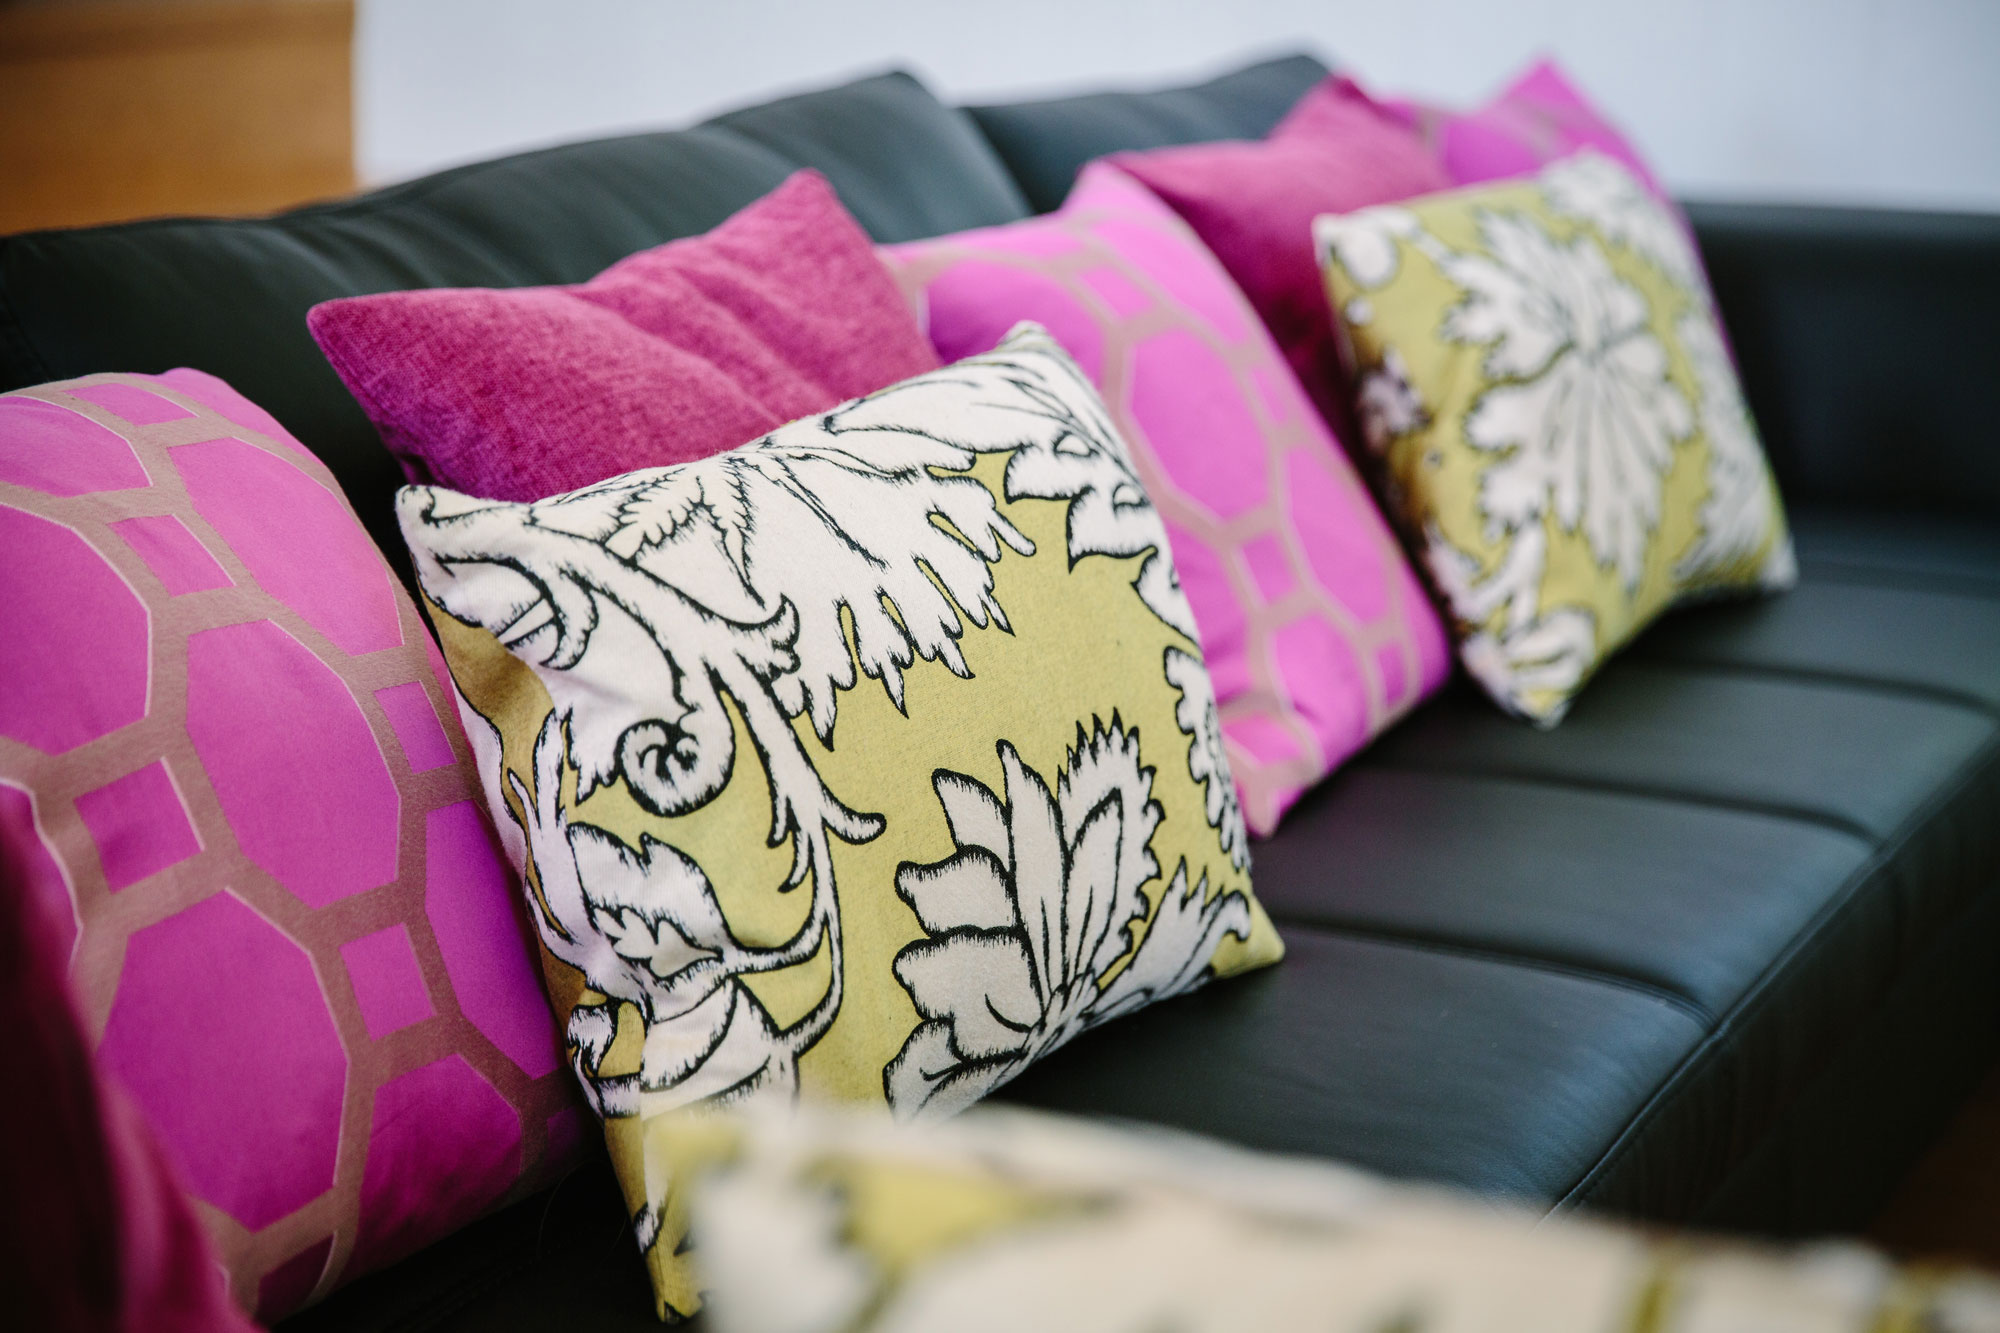 All our soft furnishings were made by an incredibly talented local seamstress